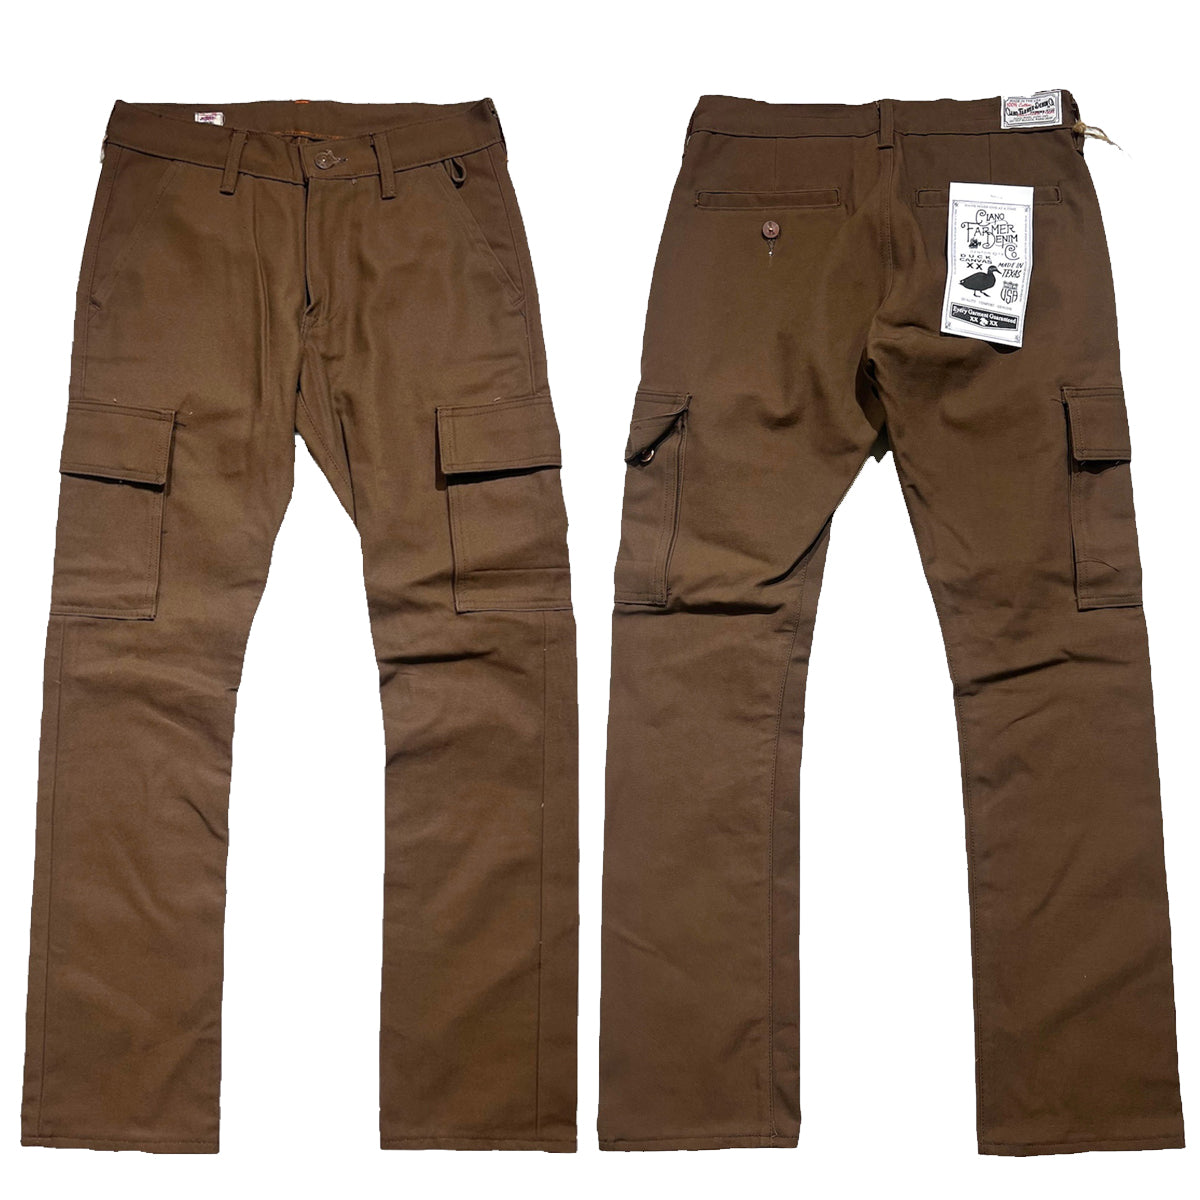 OPSTK 30W 32L 901 Slim Fit - #133 12oz Duck Canvas TIMBER CHINO "CARGOS" Version